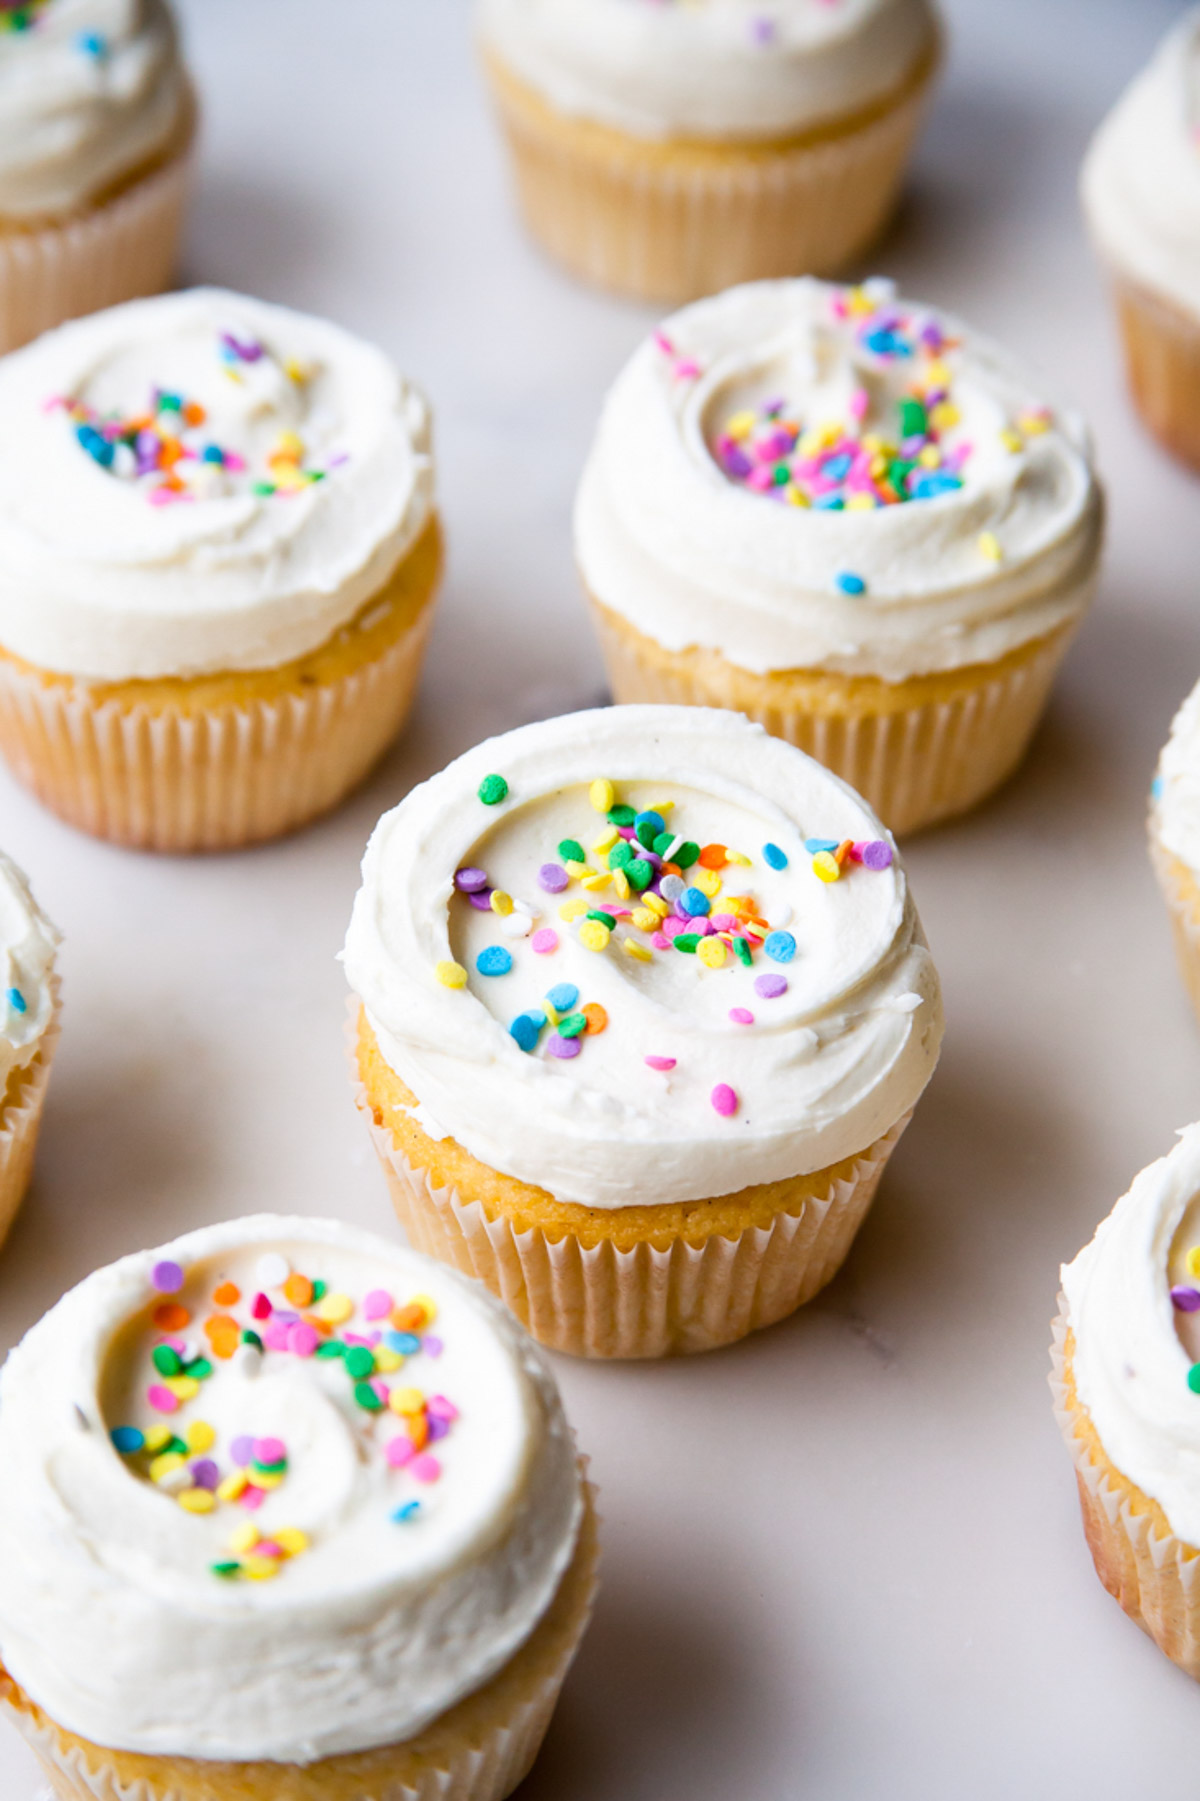 Vanilla cupcakes with perfect swirls on vanilla frosting and pastel sprinkles.